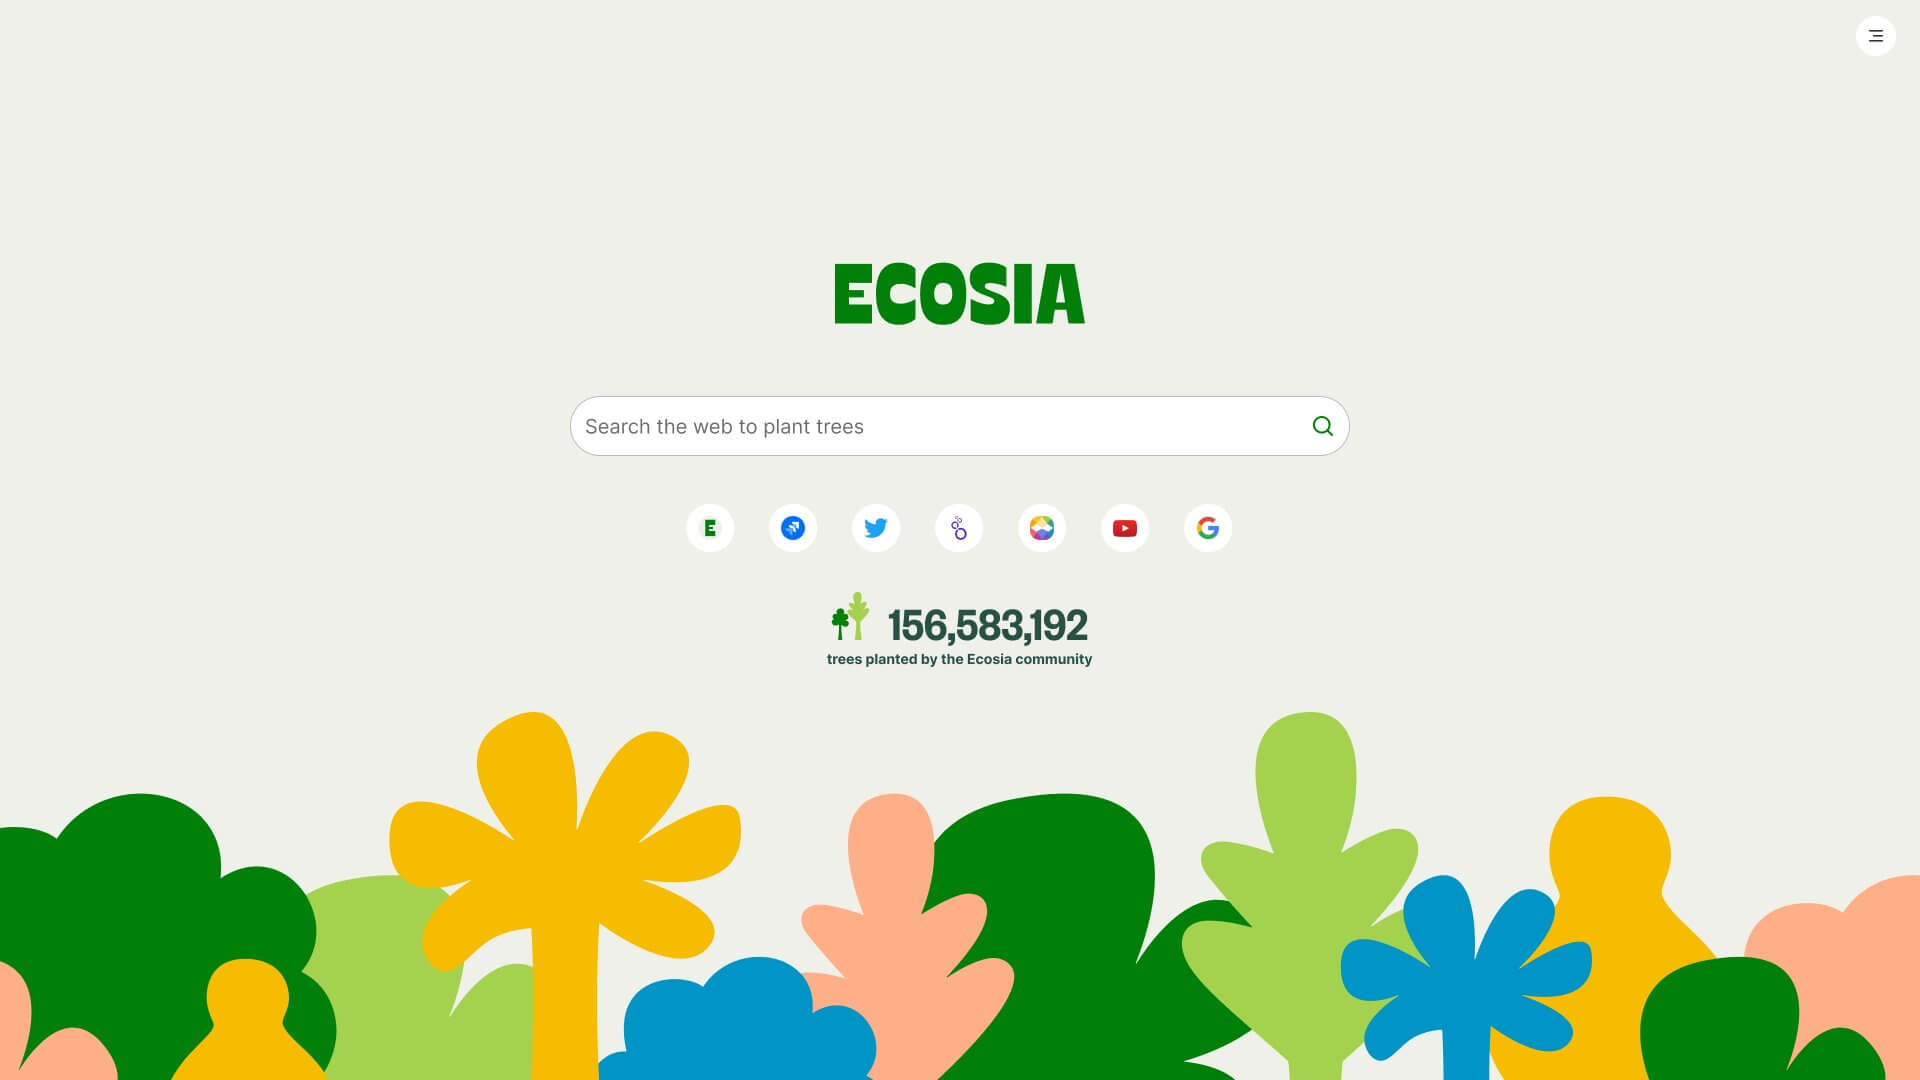 What is Ecosia?